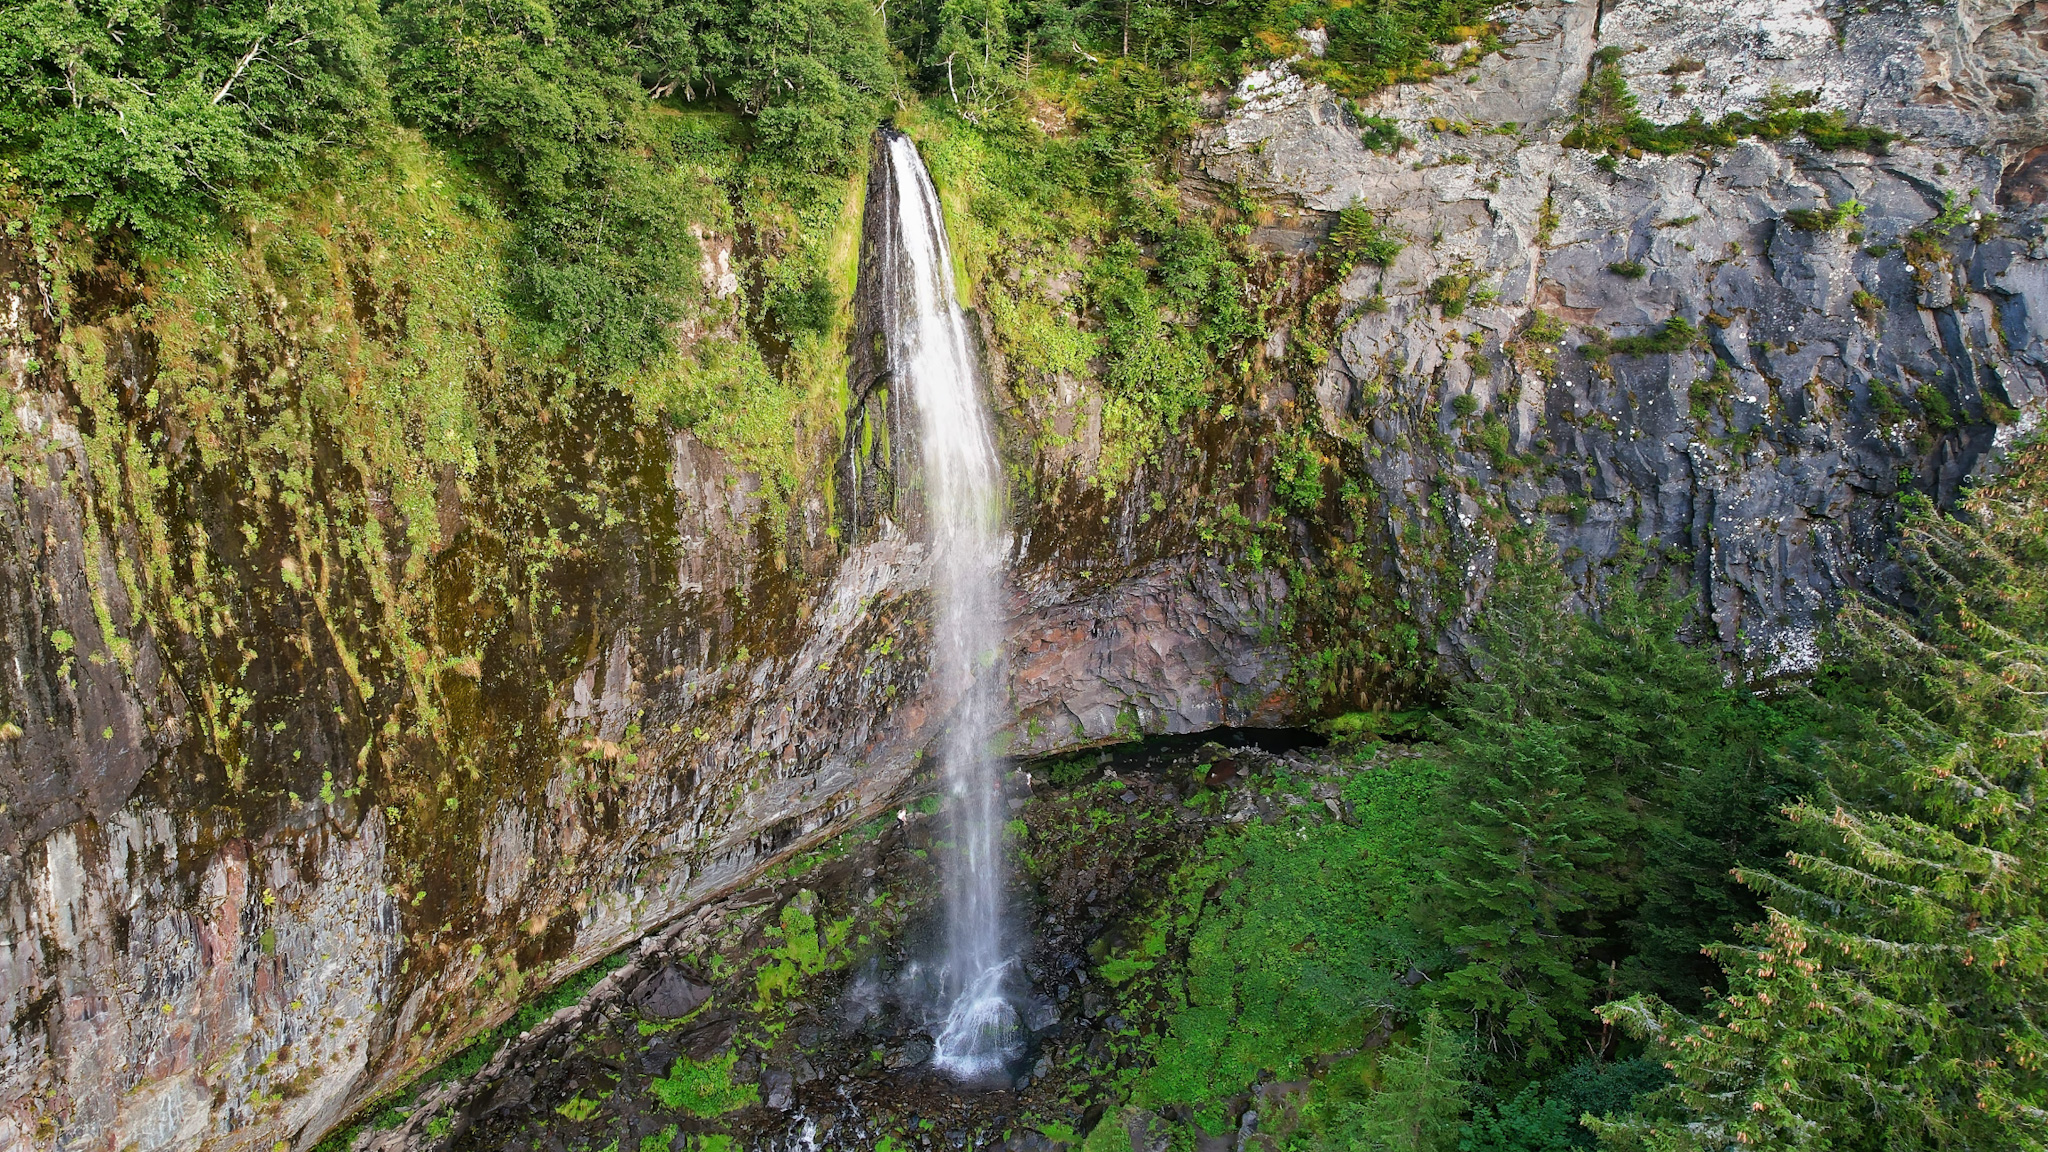 The Grande Cascade at Mont Dore, the beautiful aerial view